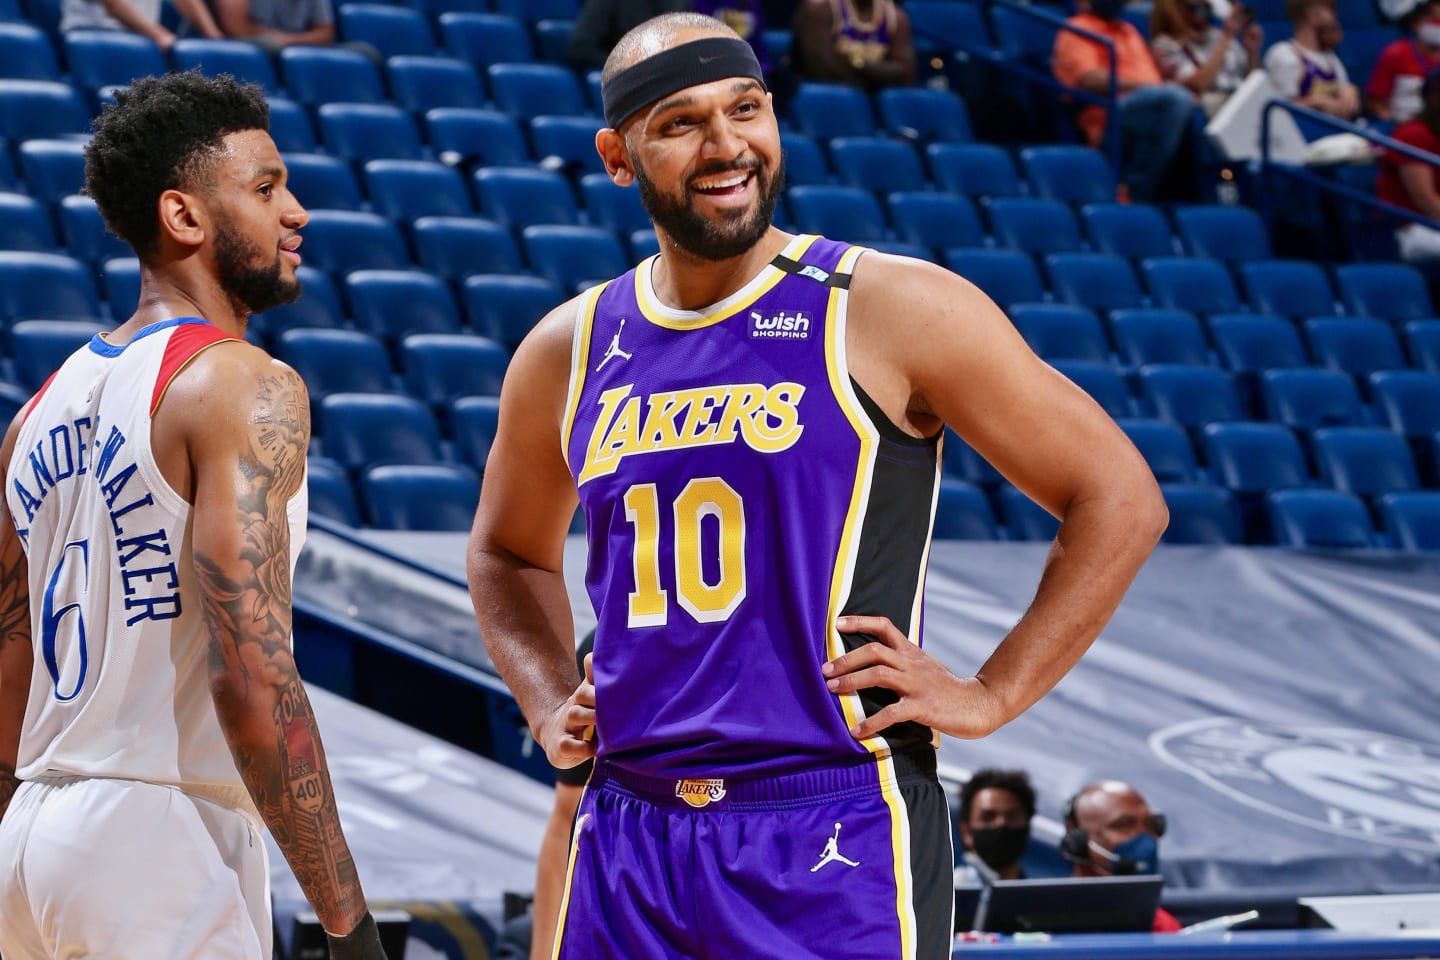 NBA Buzz - Jared Dudley, the Lakers' social media